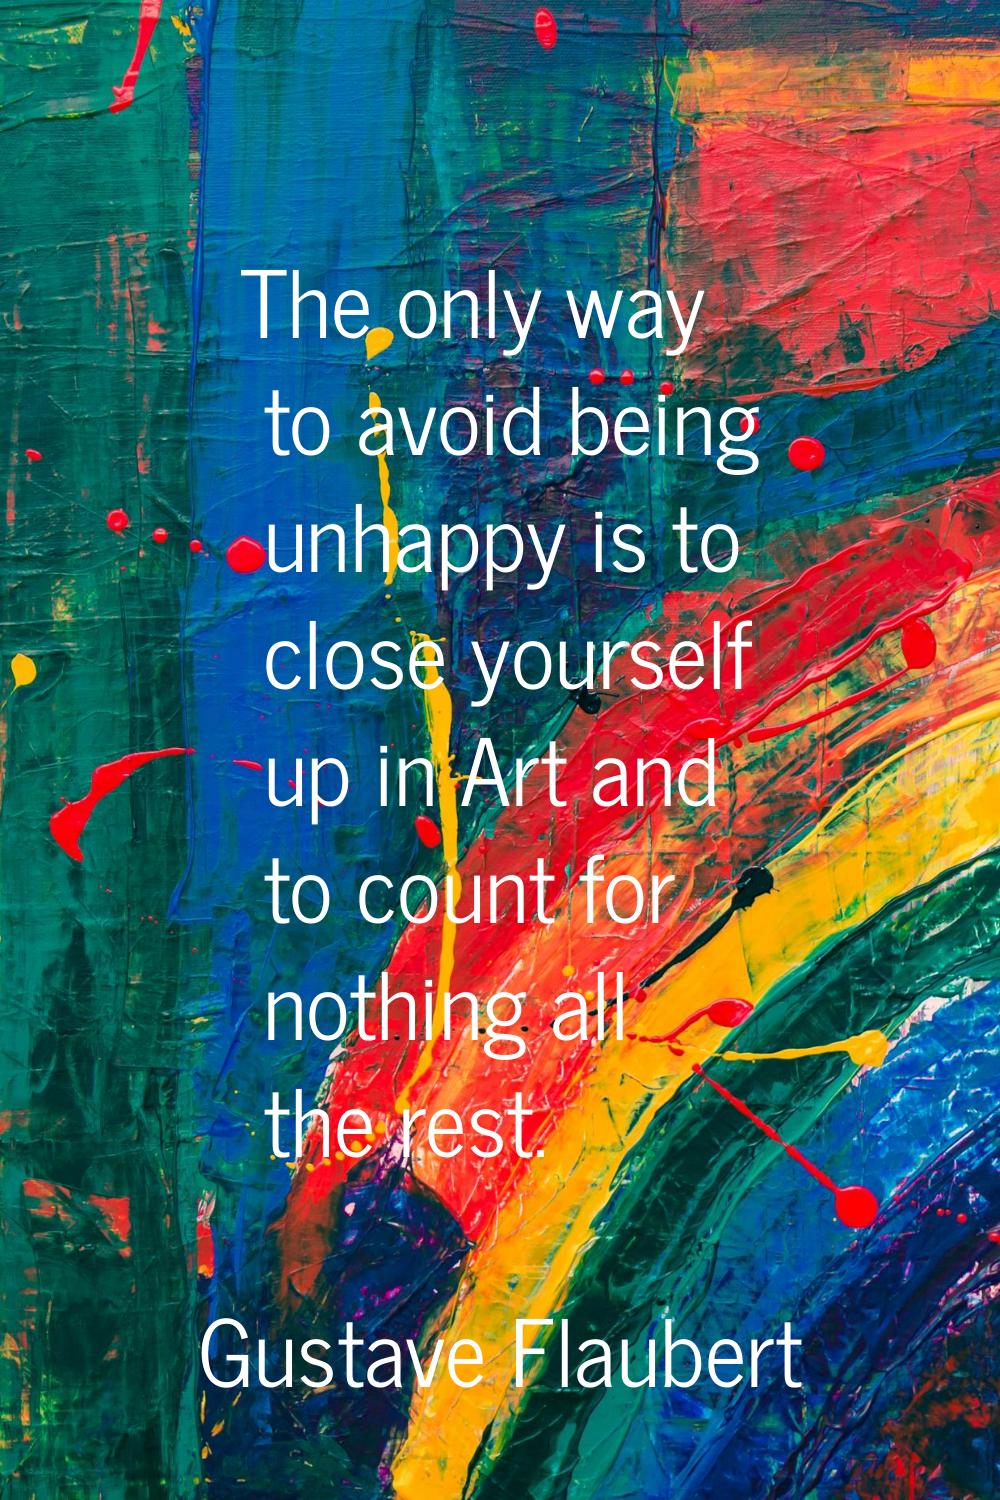 The only way to avoid being unhappy is to close yourself up in Art and to count for nothing all the